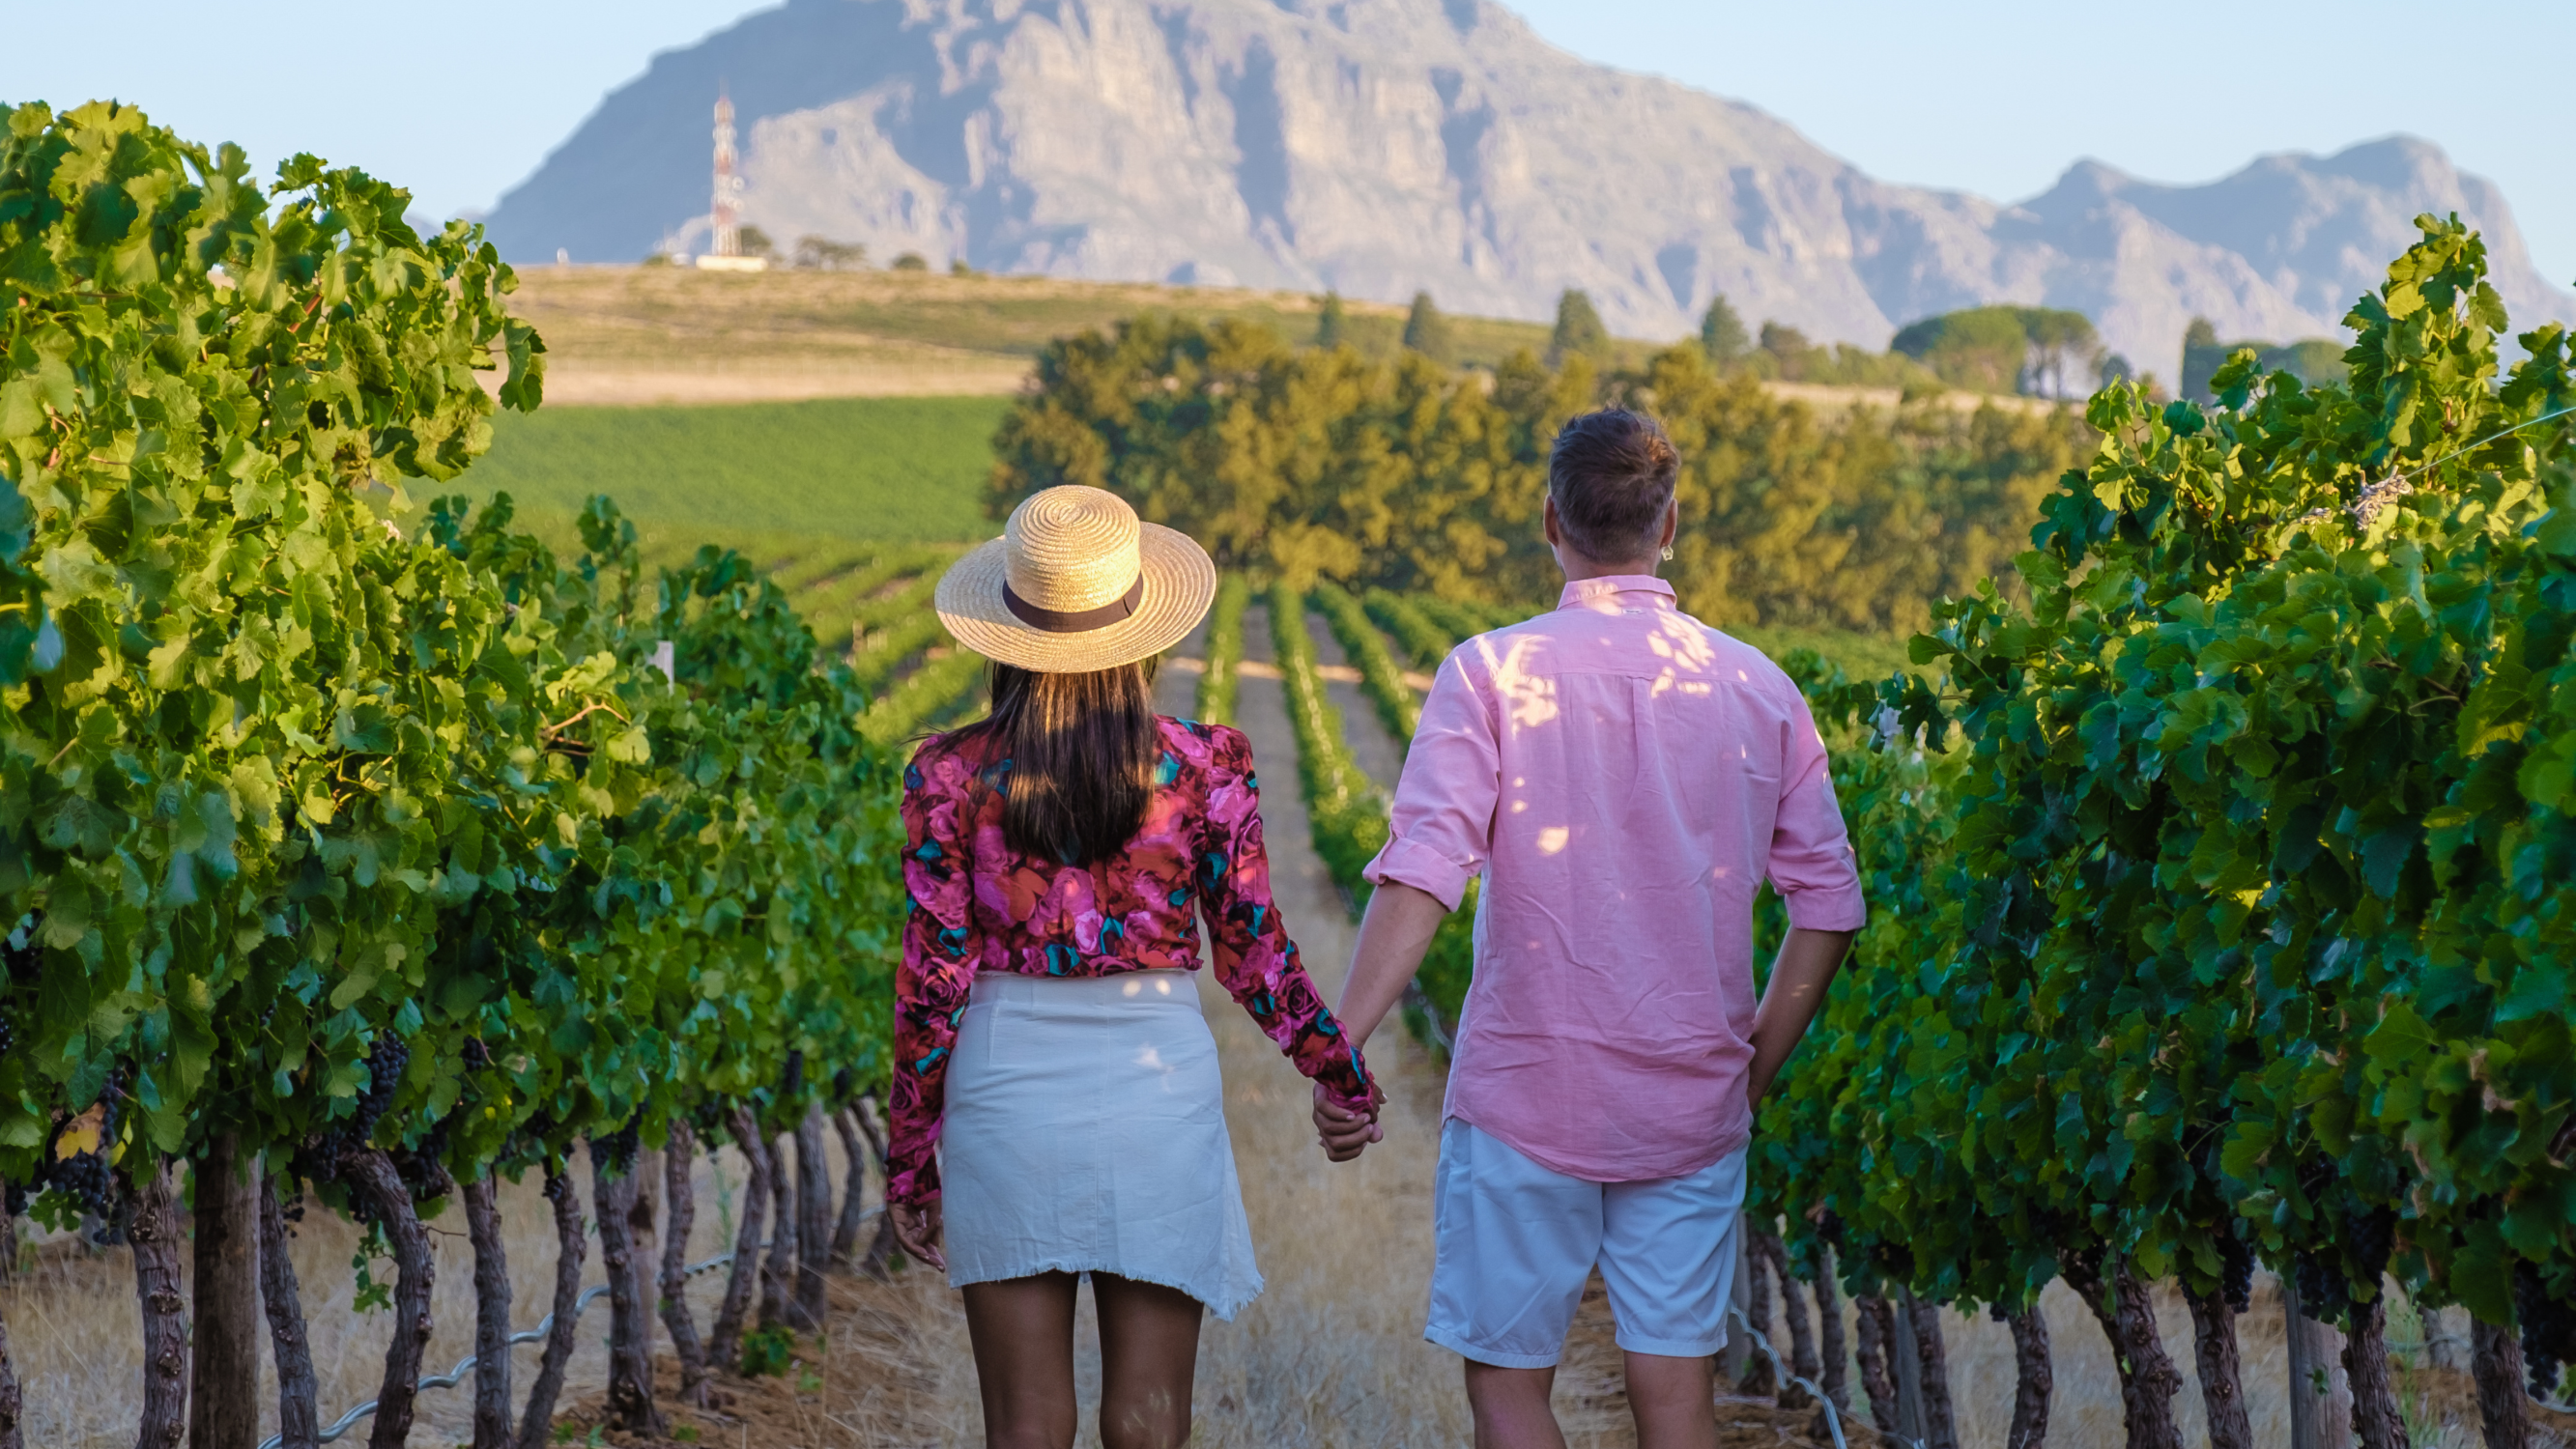 tourists-holding-hands-walking-in-winelands-vineyard-mountains-Cape-winelands-accomodation-tour-operator-cape-town-into-tours-groot-constantia-city-sightseeing-constantia-valley-paarl-wine-pairing-franschhoek-western-cape-franschhoek-wine-farms-wine-estates-cape-town-wine-south-africa-stellenbosch-wine-route
Vineyards-mountains-jonkershoek-simonsig-dorp-street-university-cape-town-wine-tasting-western-cape-winelands-house-wine-farms-wine-estate-resturant-stellenbosch-accomodation-into-tours-cape-town-wine-tasting-day-tours-private-tours-cape-town-tour-guide
